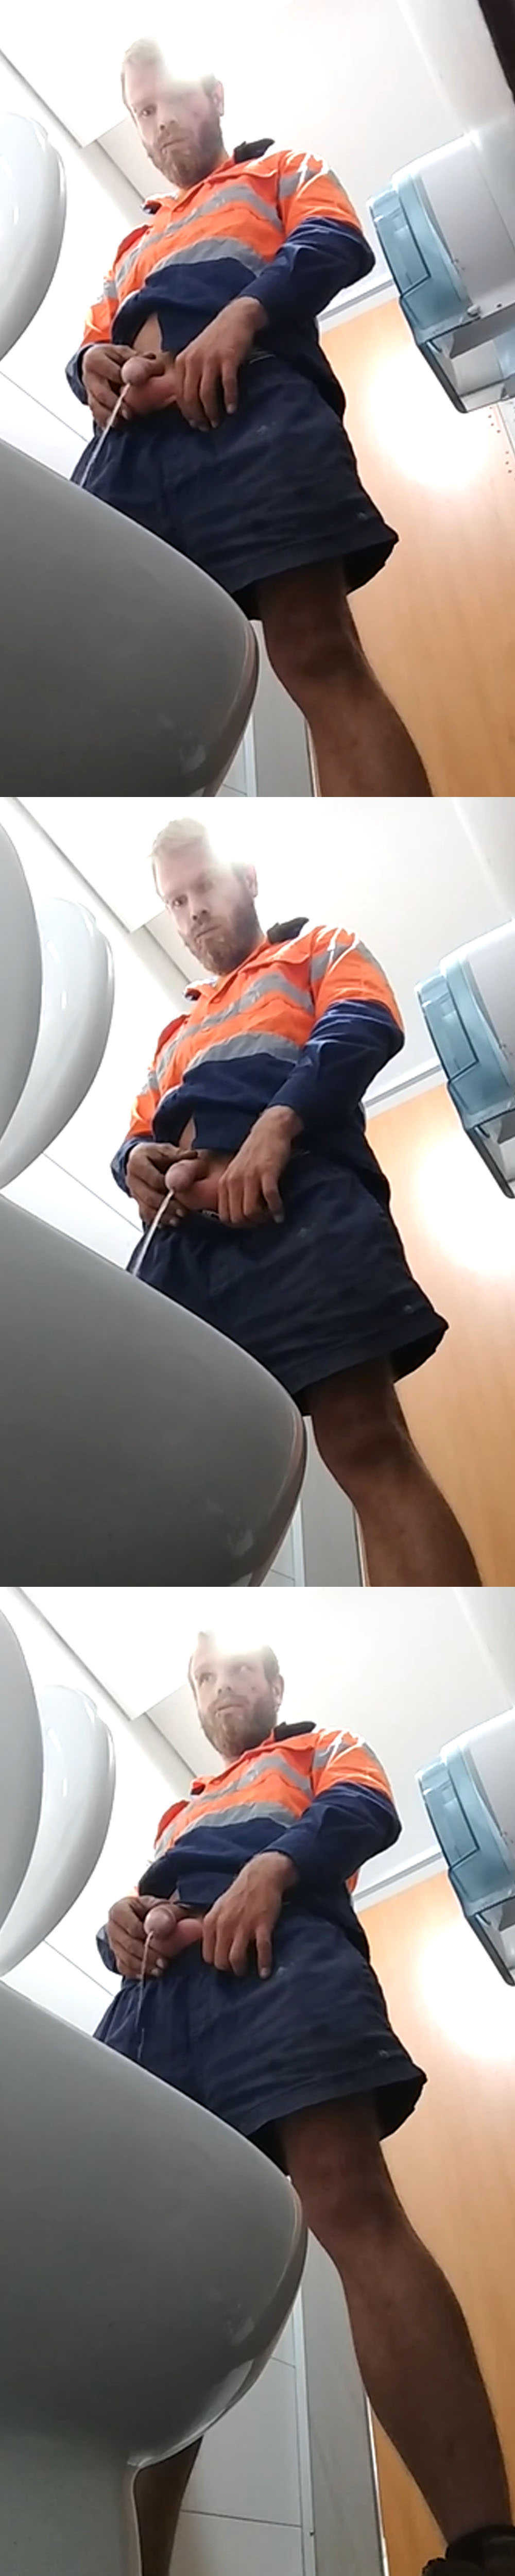 worker with big cock caught peeing in public toilet by hidden camera